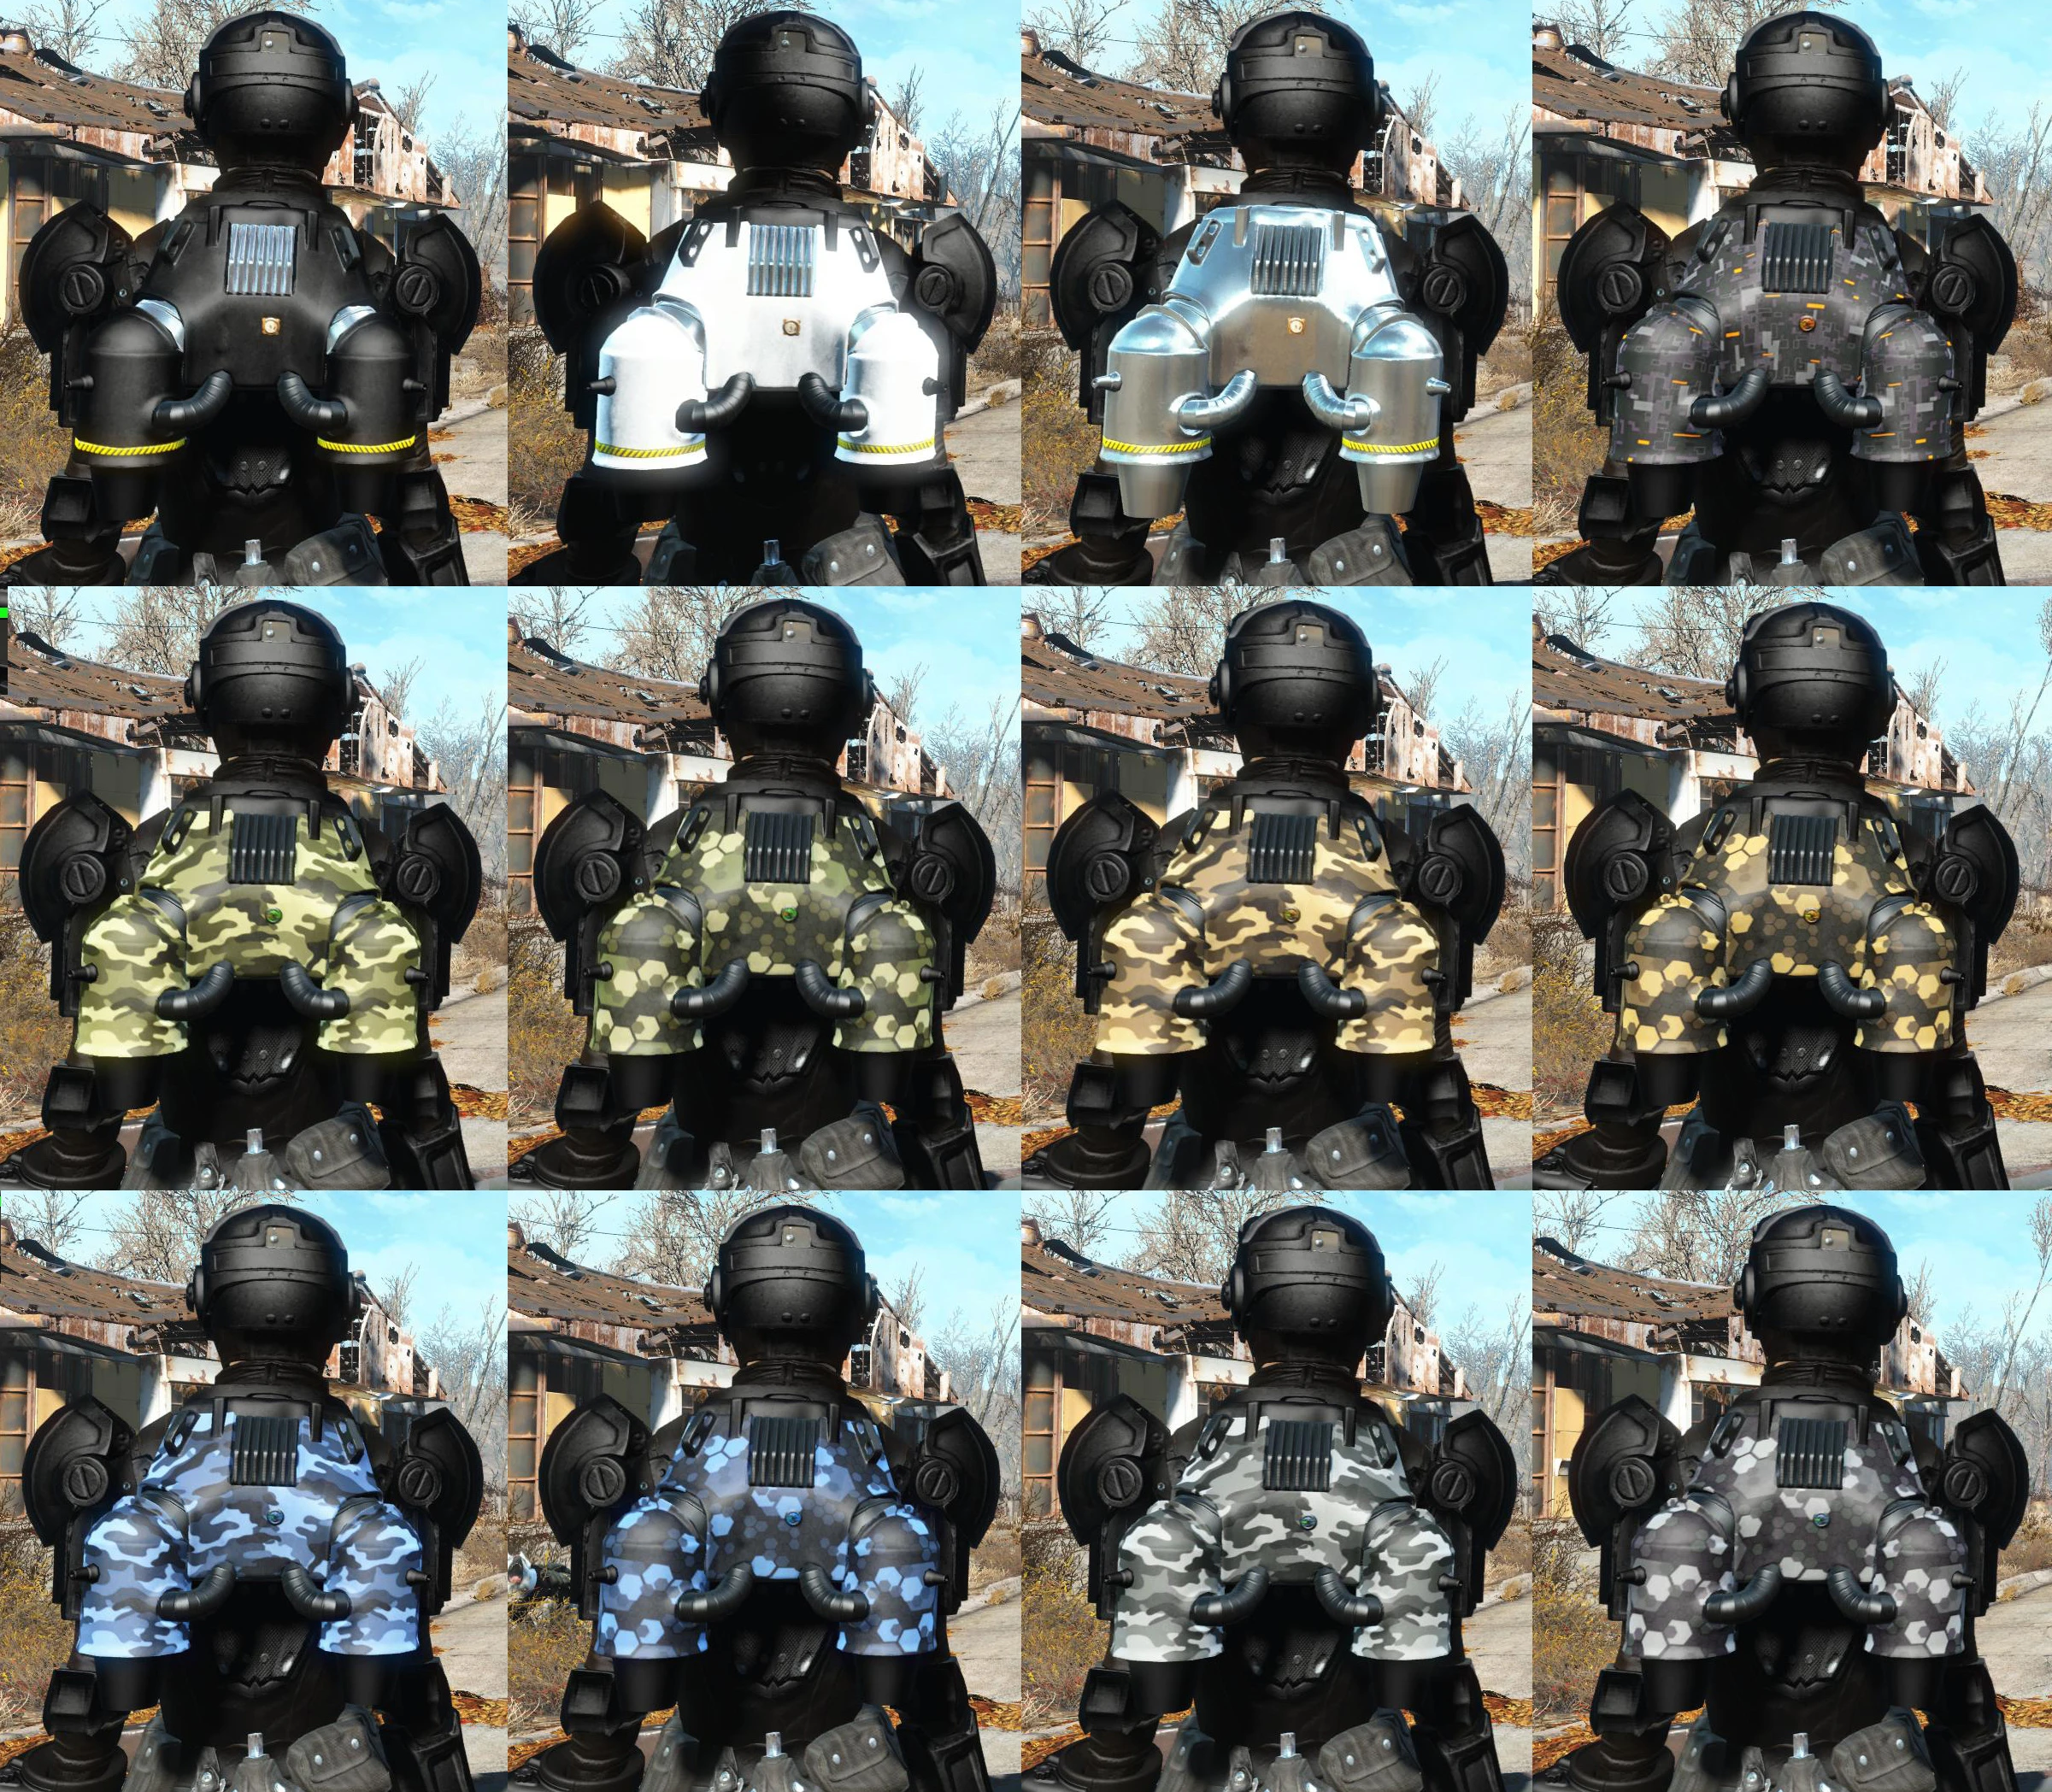 SF Combat Armor and Jetpack 2019 at Fallout 4 Nexus - Mods and community